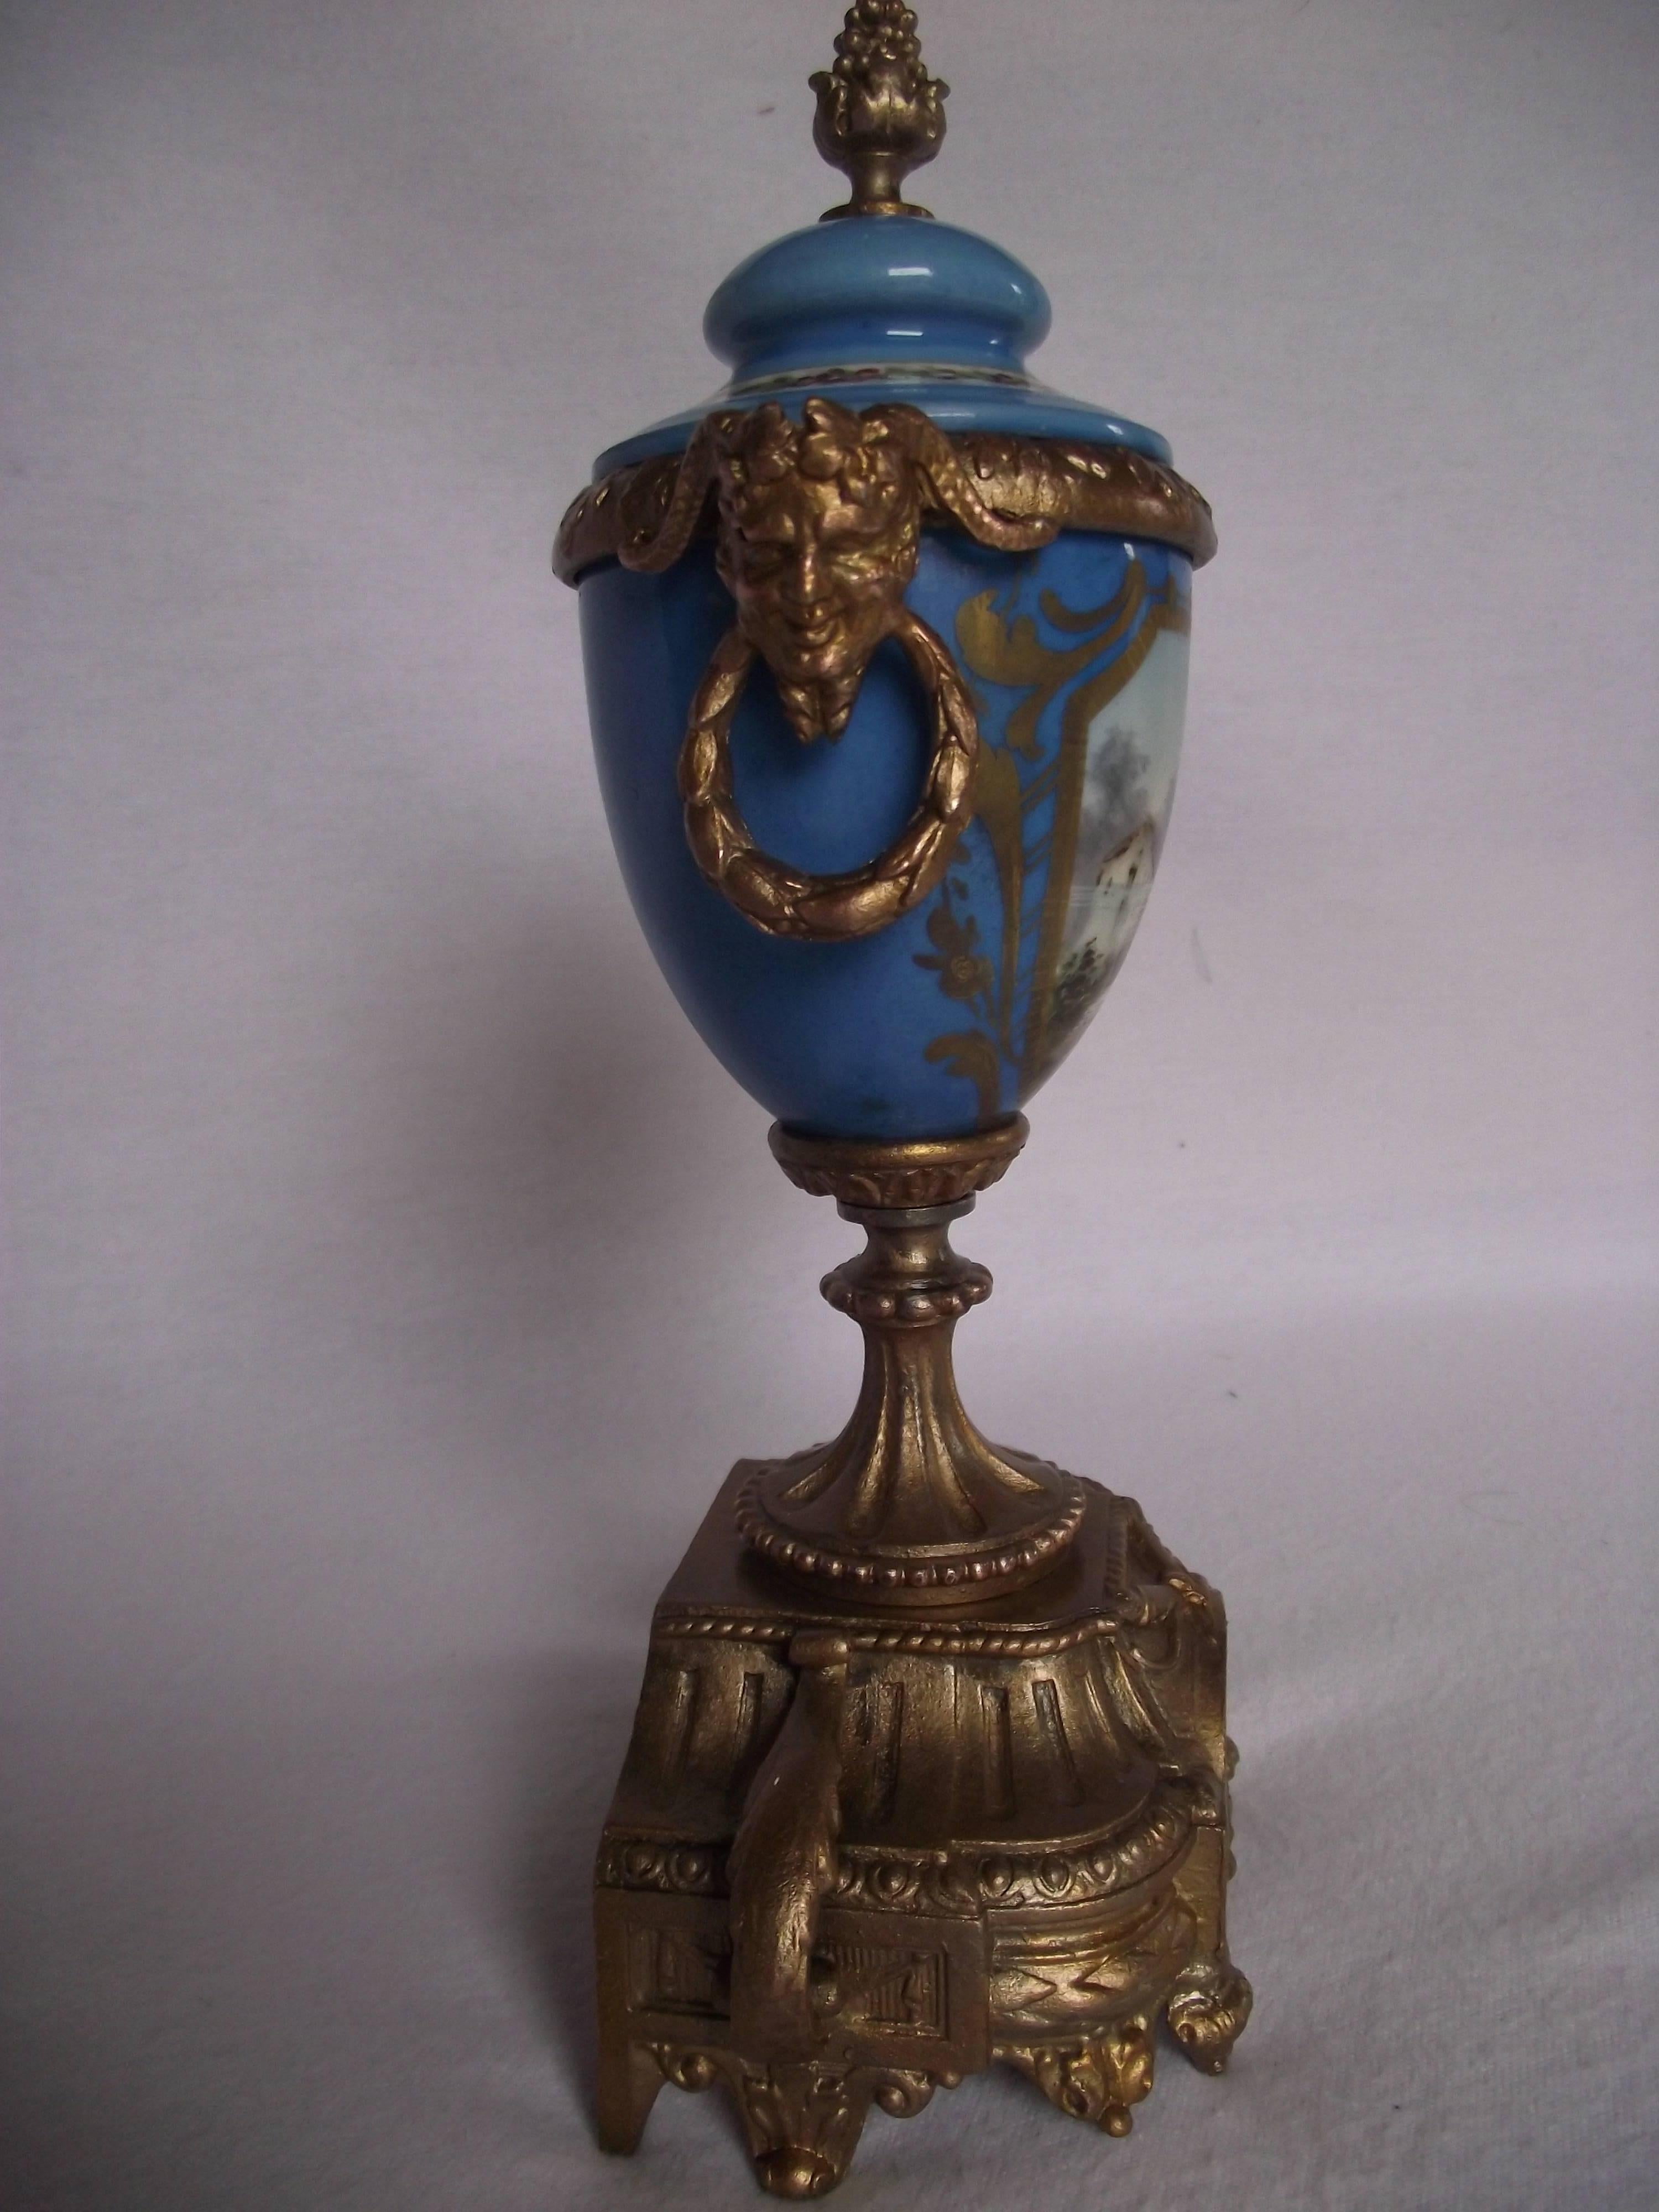 Neoclassical Sèvres Style Urn, Hand-Painted Porcelain Gilt Metal Urn